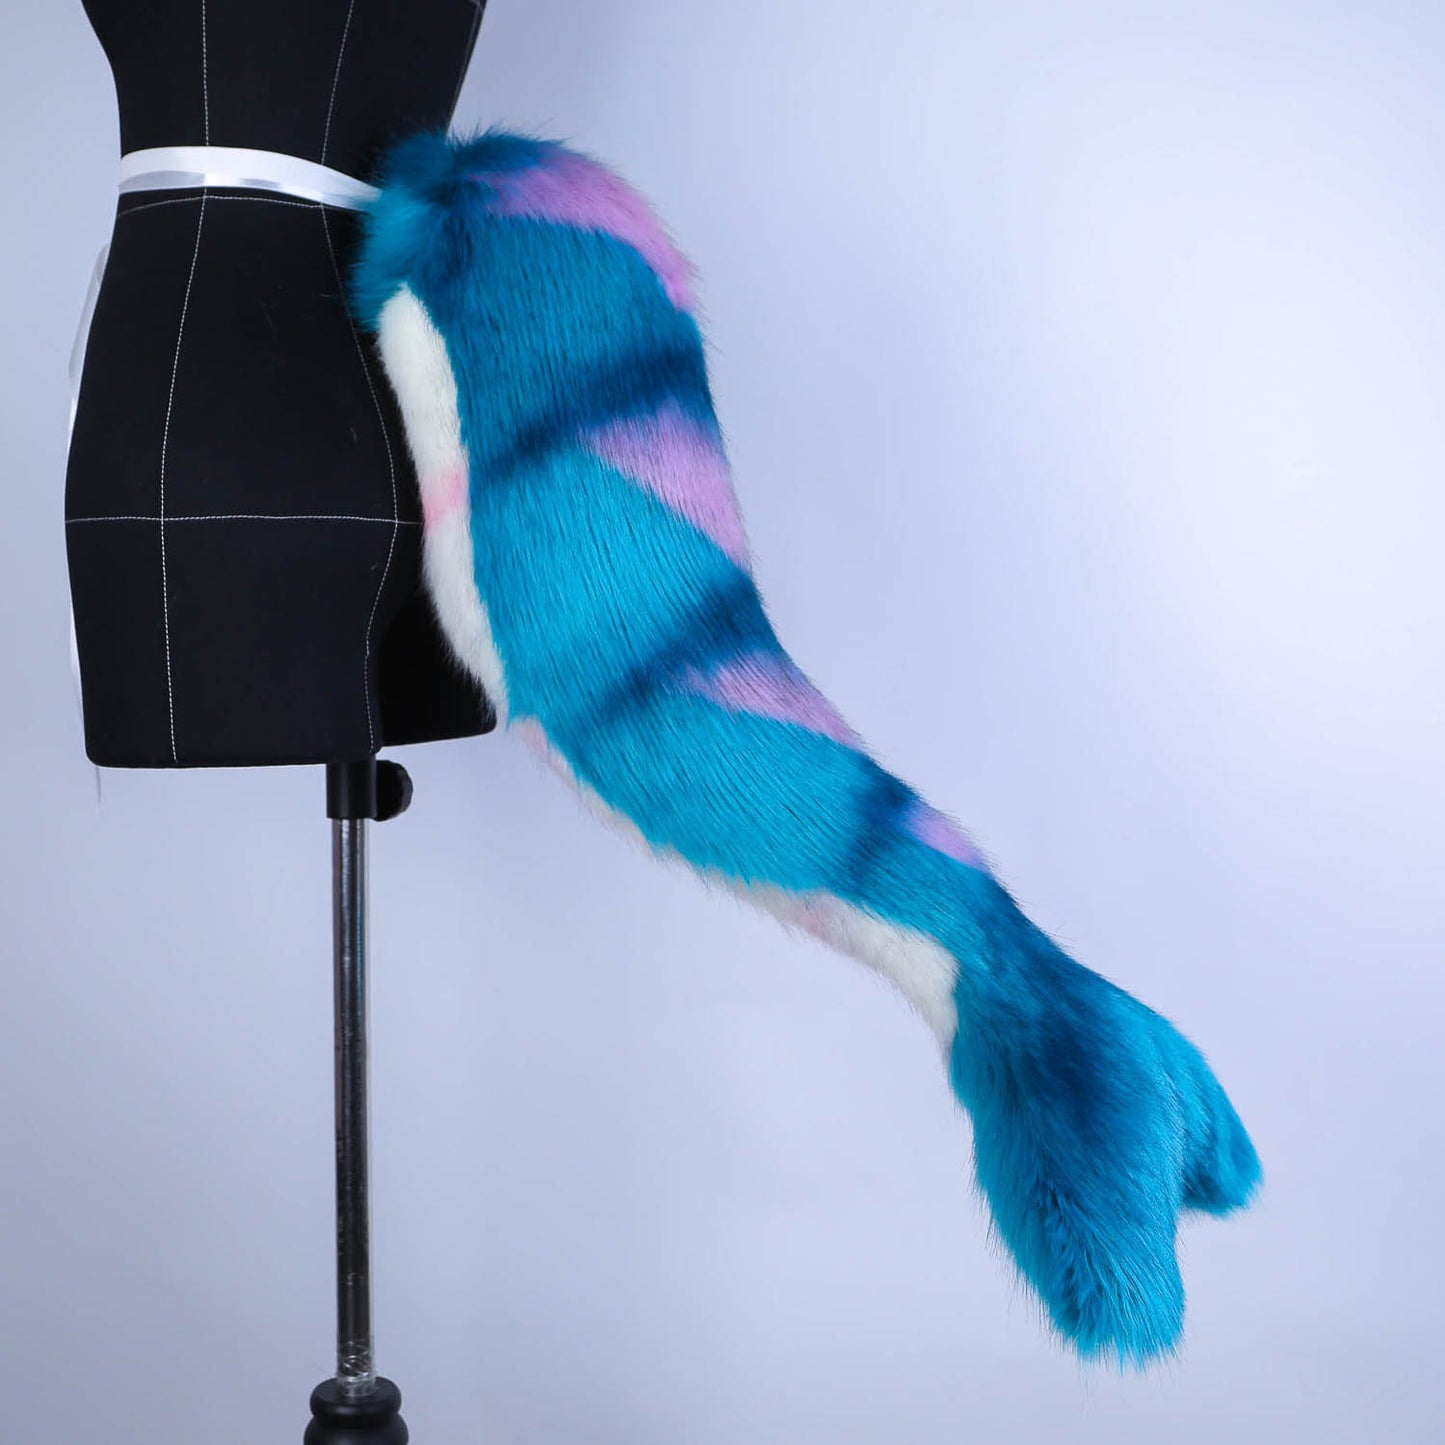 Teal Shrimp Ears and Tail Set